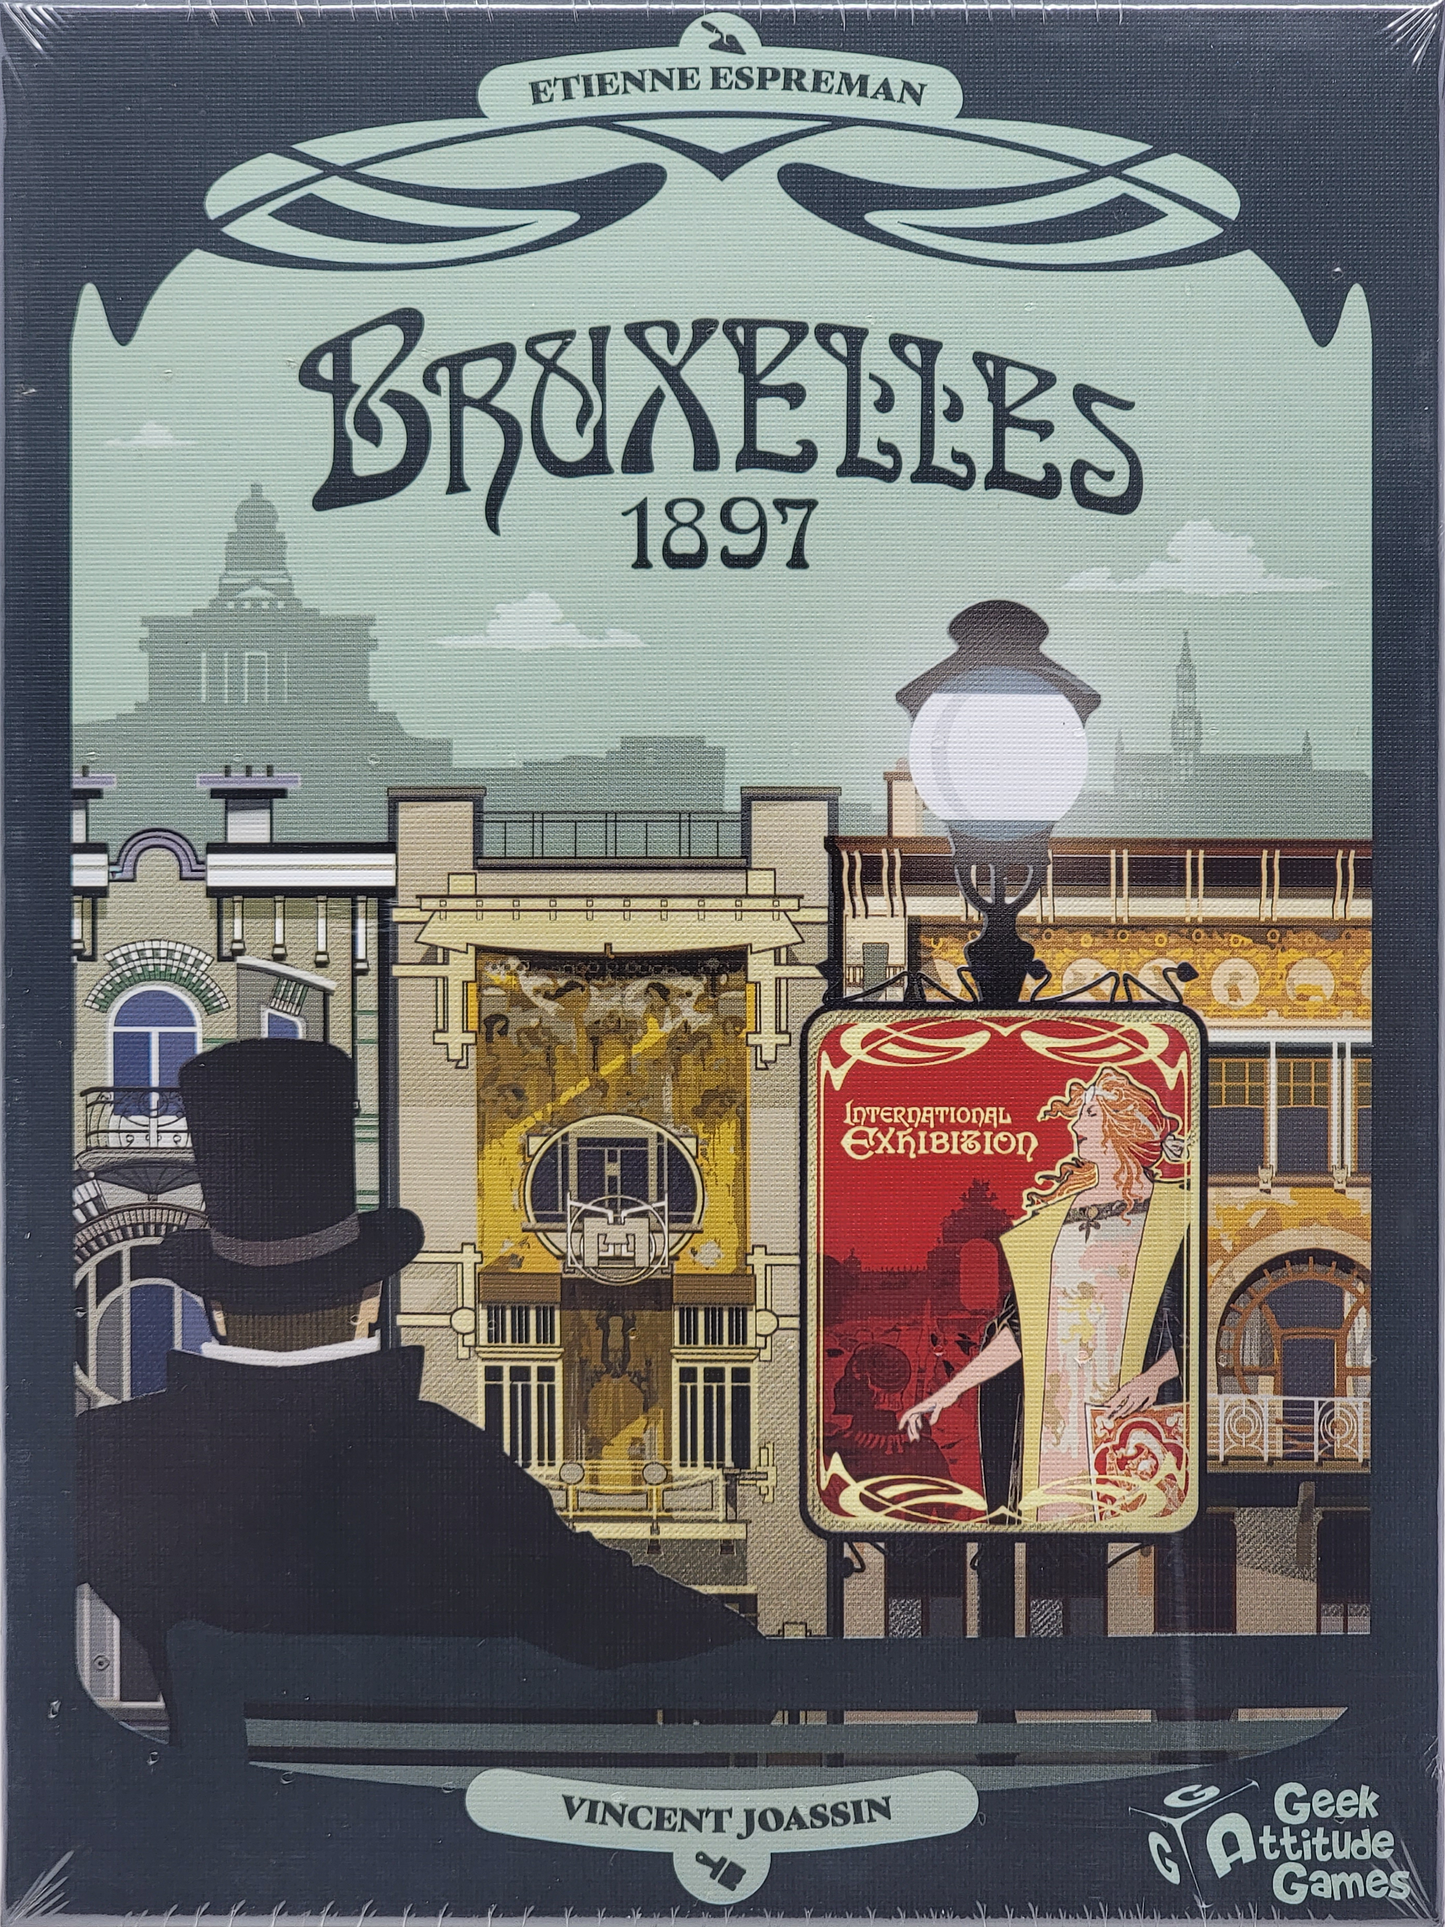 Bruxelles 1897 - Construct Architectural Masterpieces and Expand Your Social Circle.